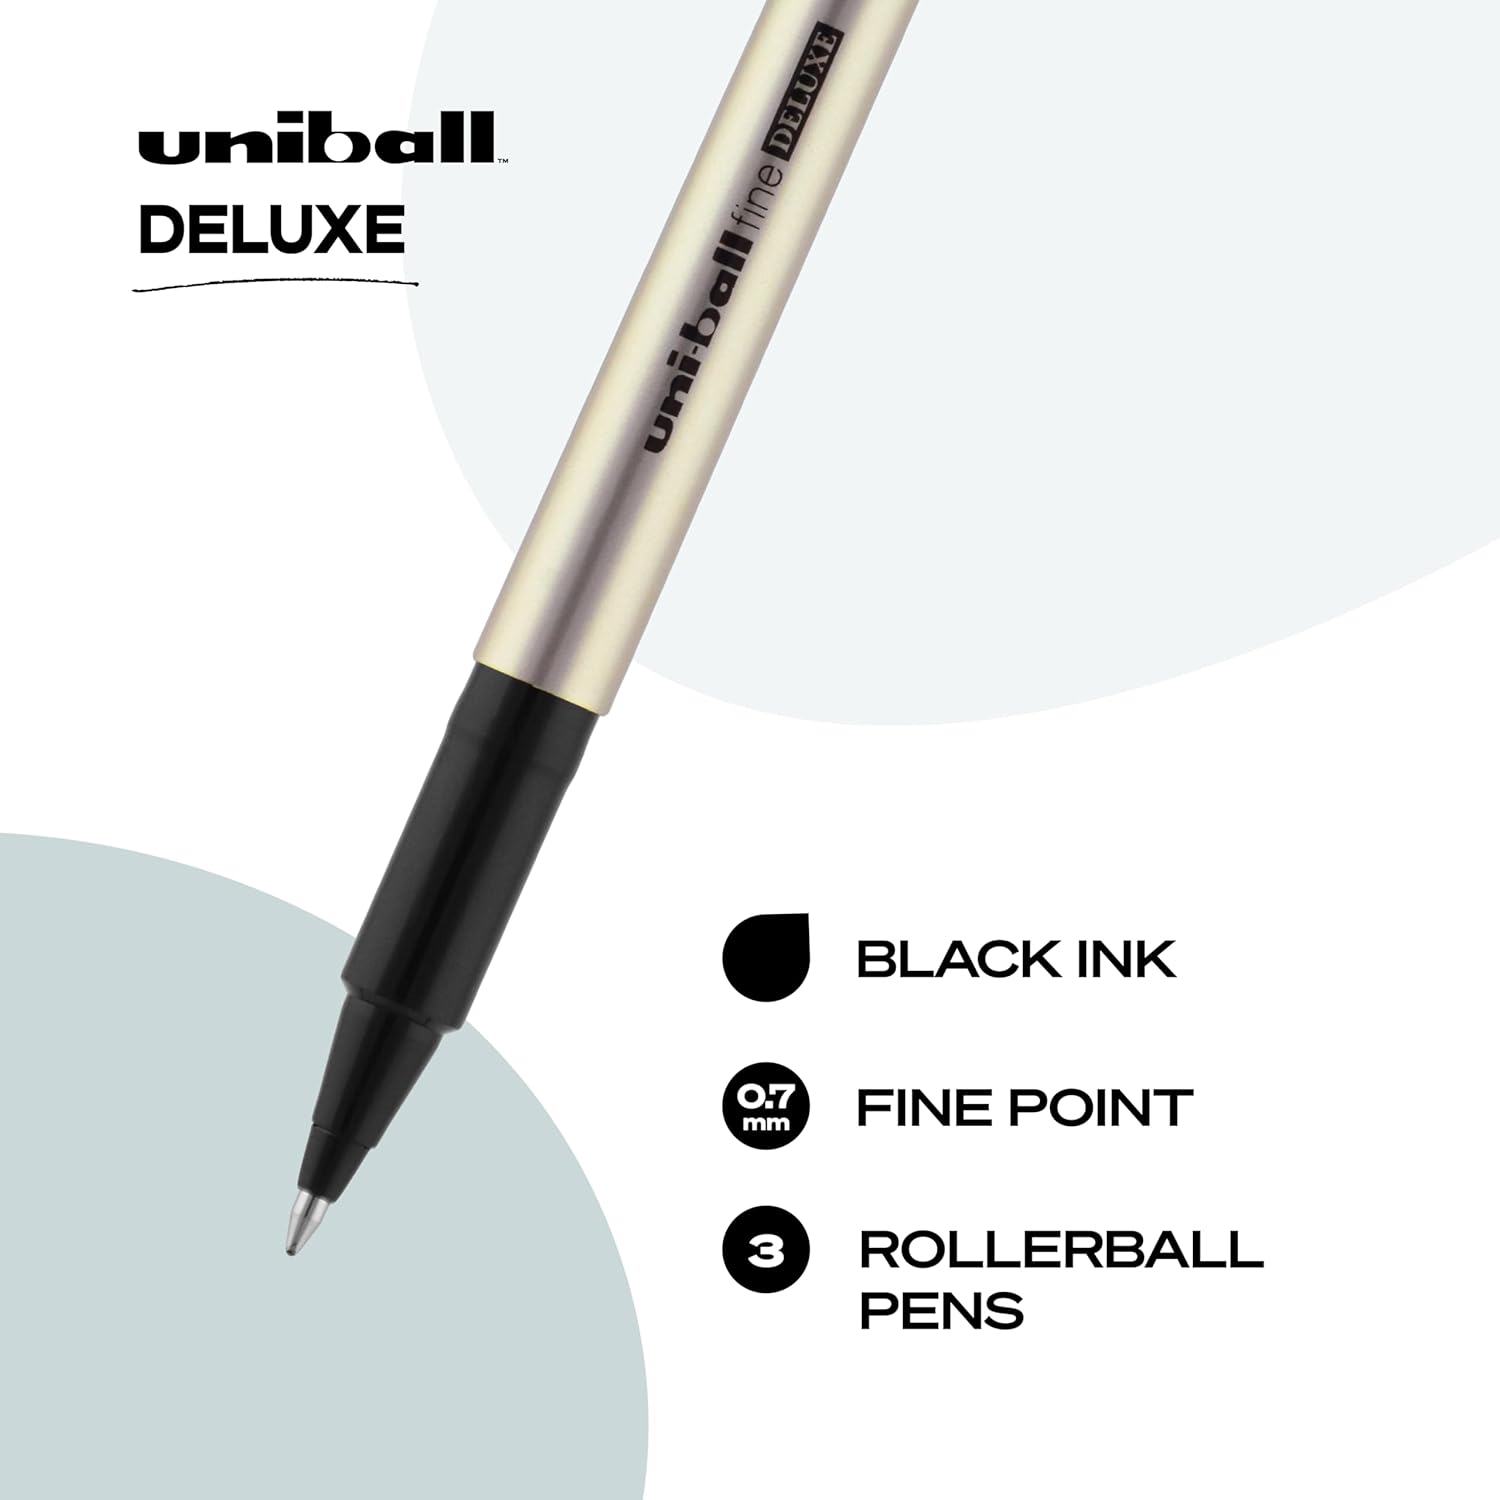 Uniball Deluxe Rollerball Pen,0.7MM Fine Point,3 Pack